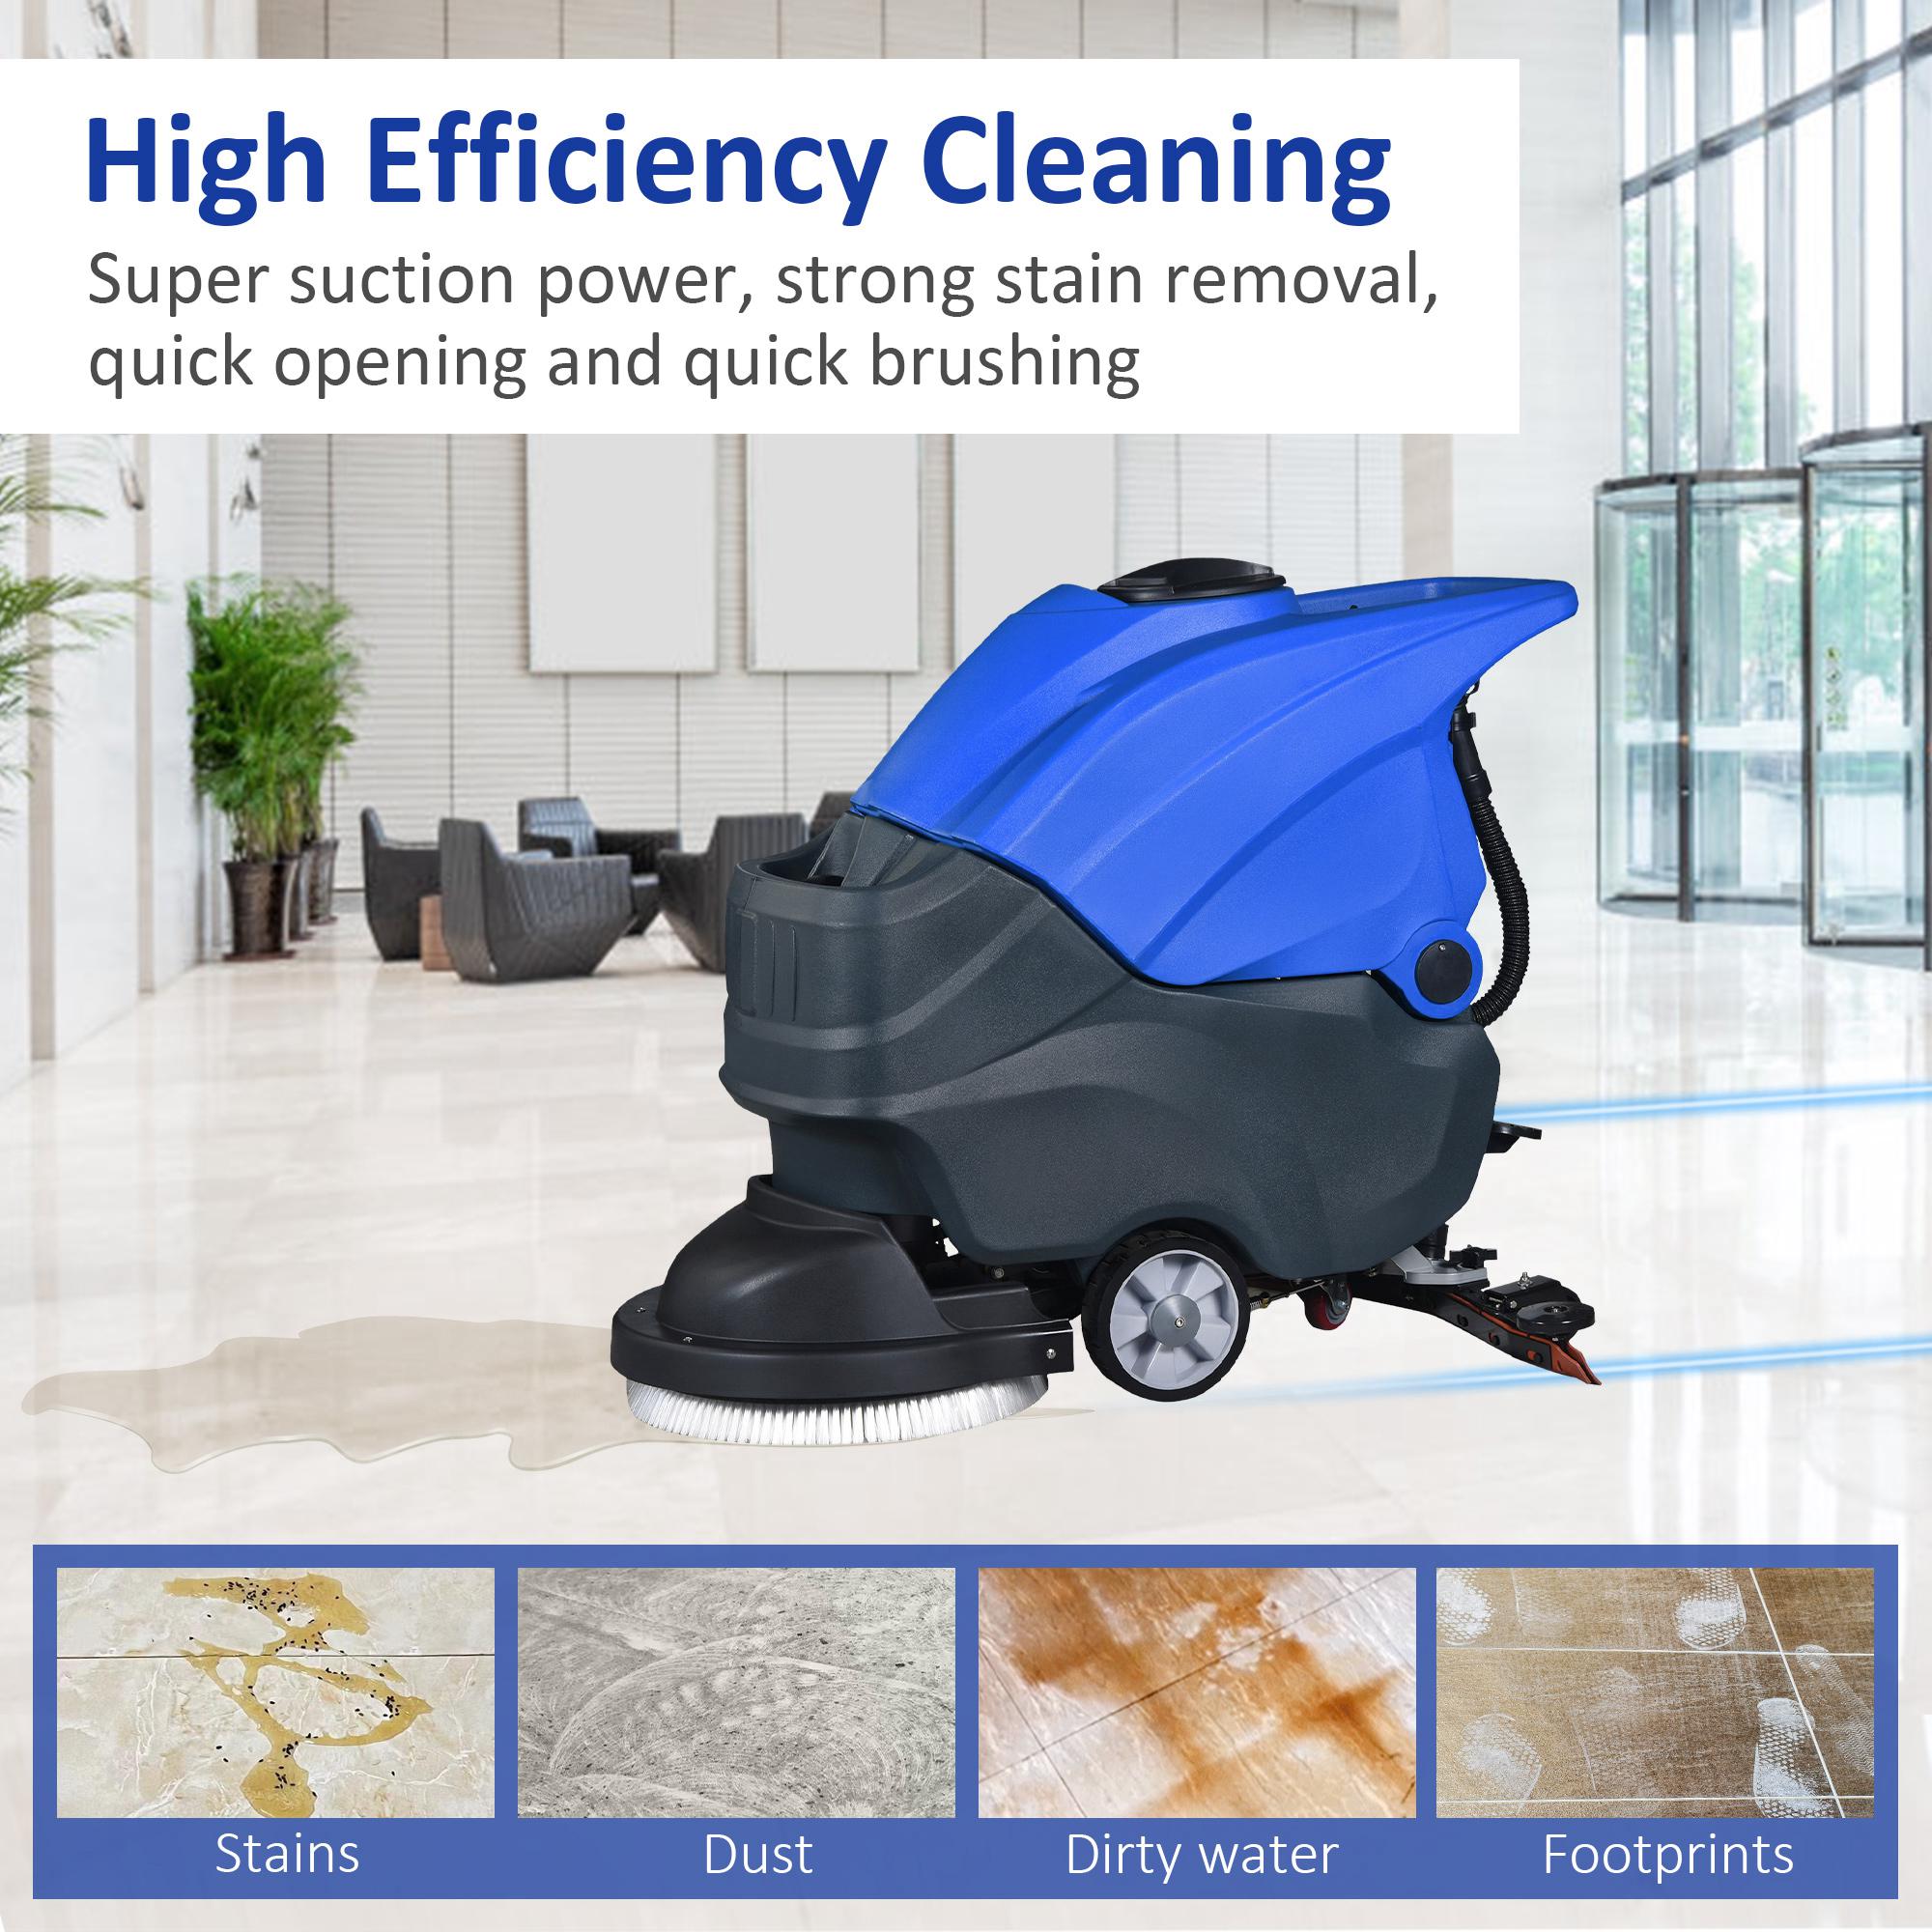 Walk-Behind Commercial Floor Scrubber with 20.8" Cleaning Path